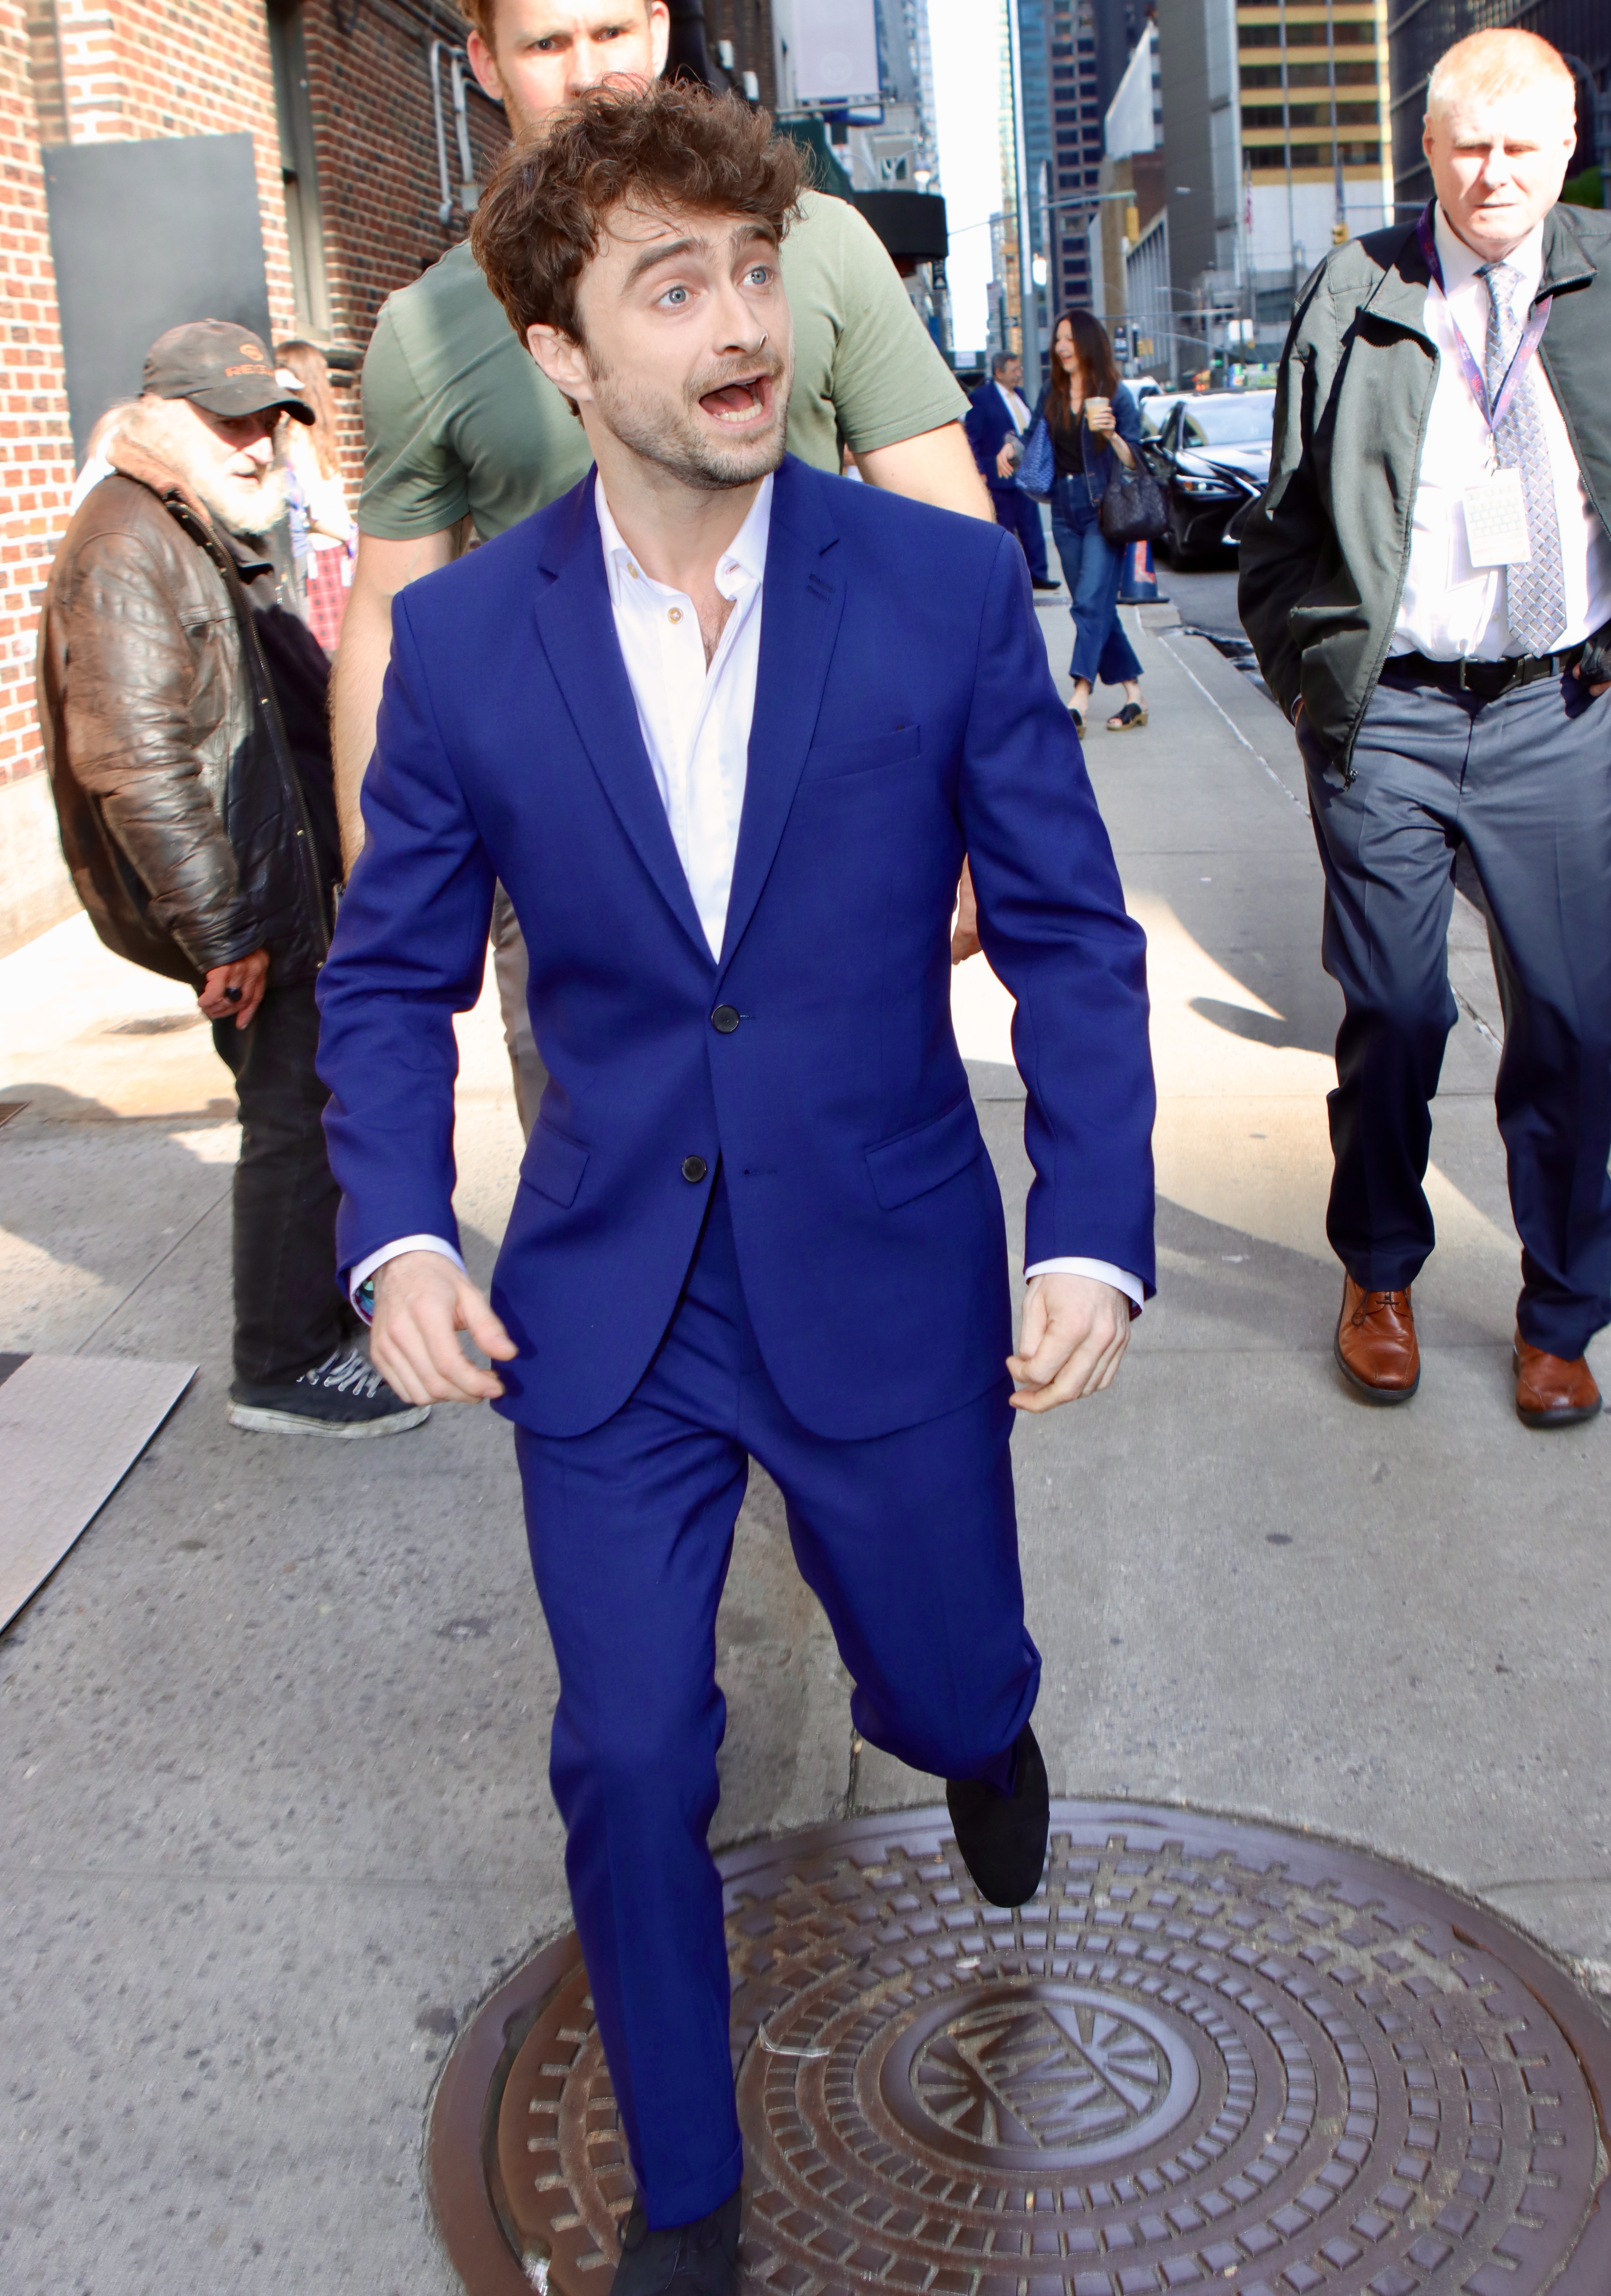 Daniel Radcliffe was spotted in New York on Monday dressed in this smart blue suit and white shirt